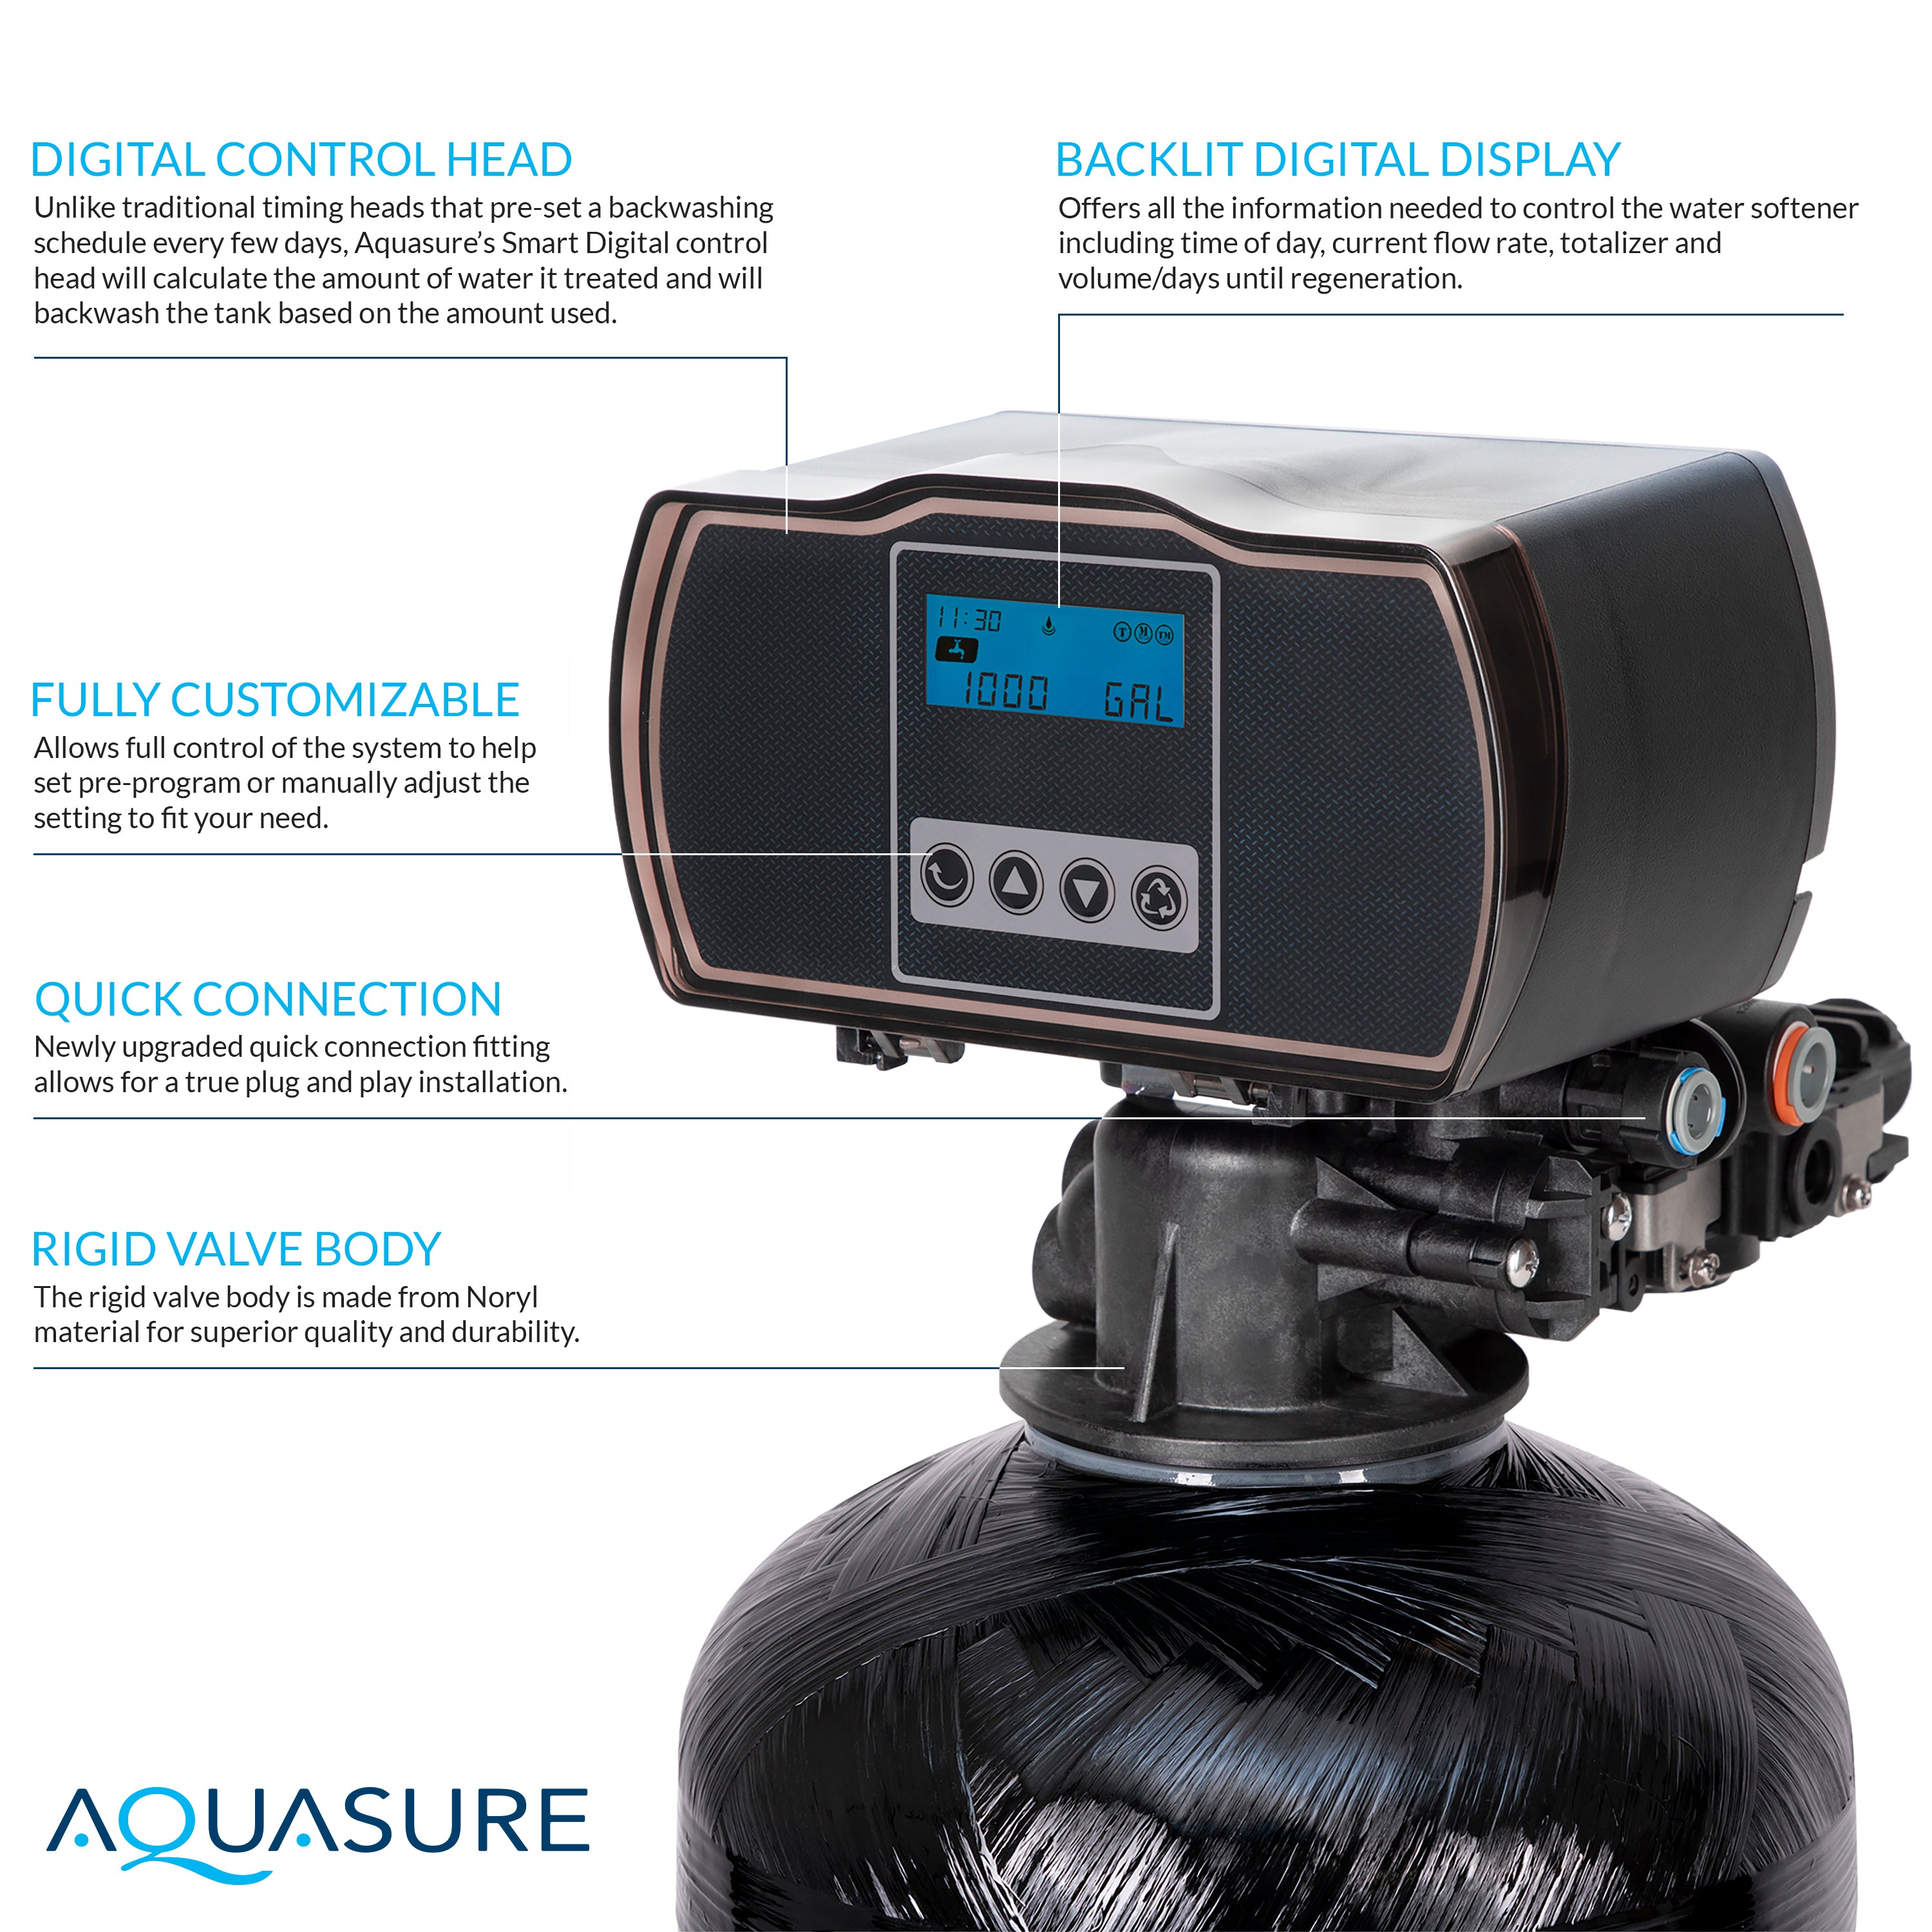 Signature Pro Series 64K: Ultimate Whole House Water Solution - 75 GPD Reverse Osmosis (RO) System